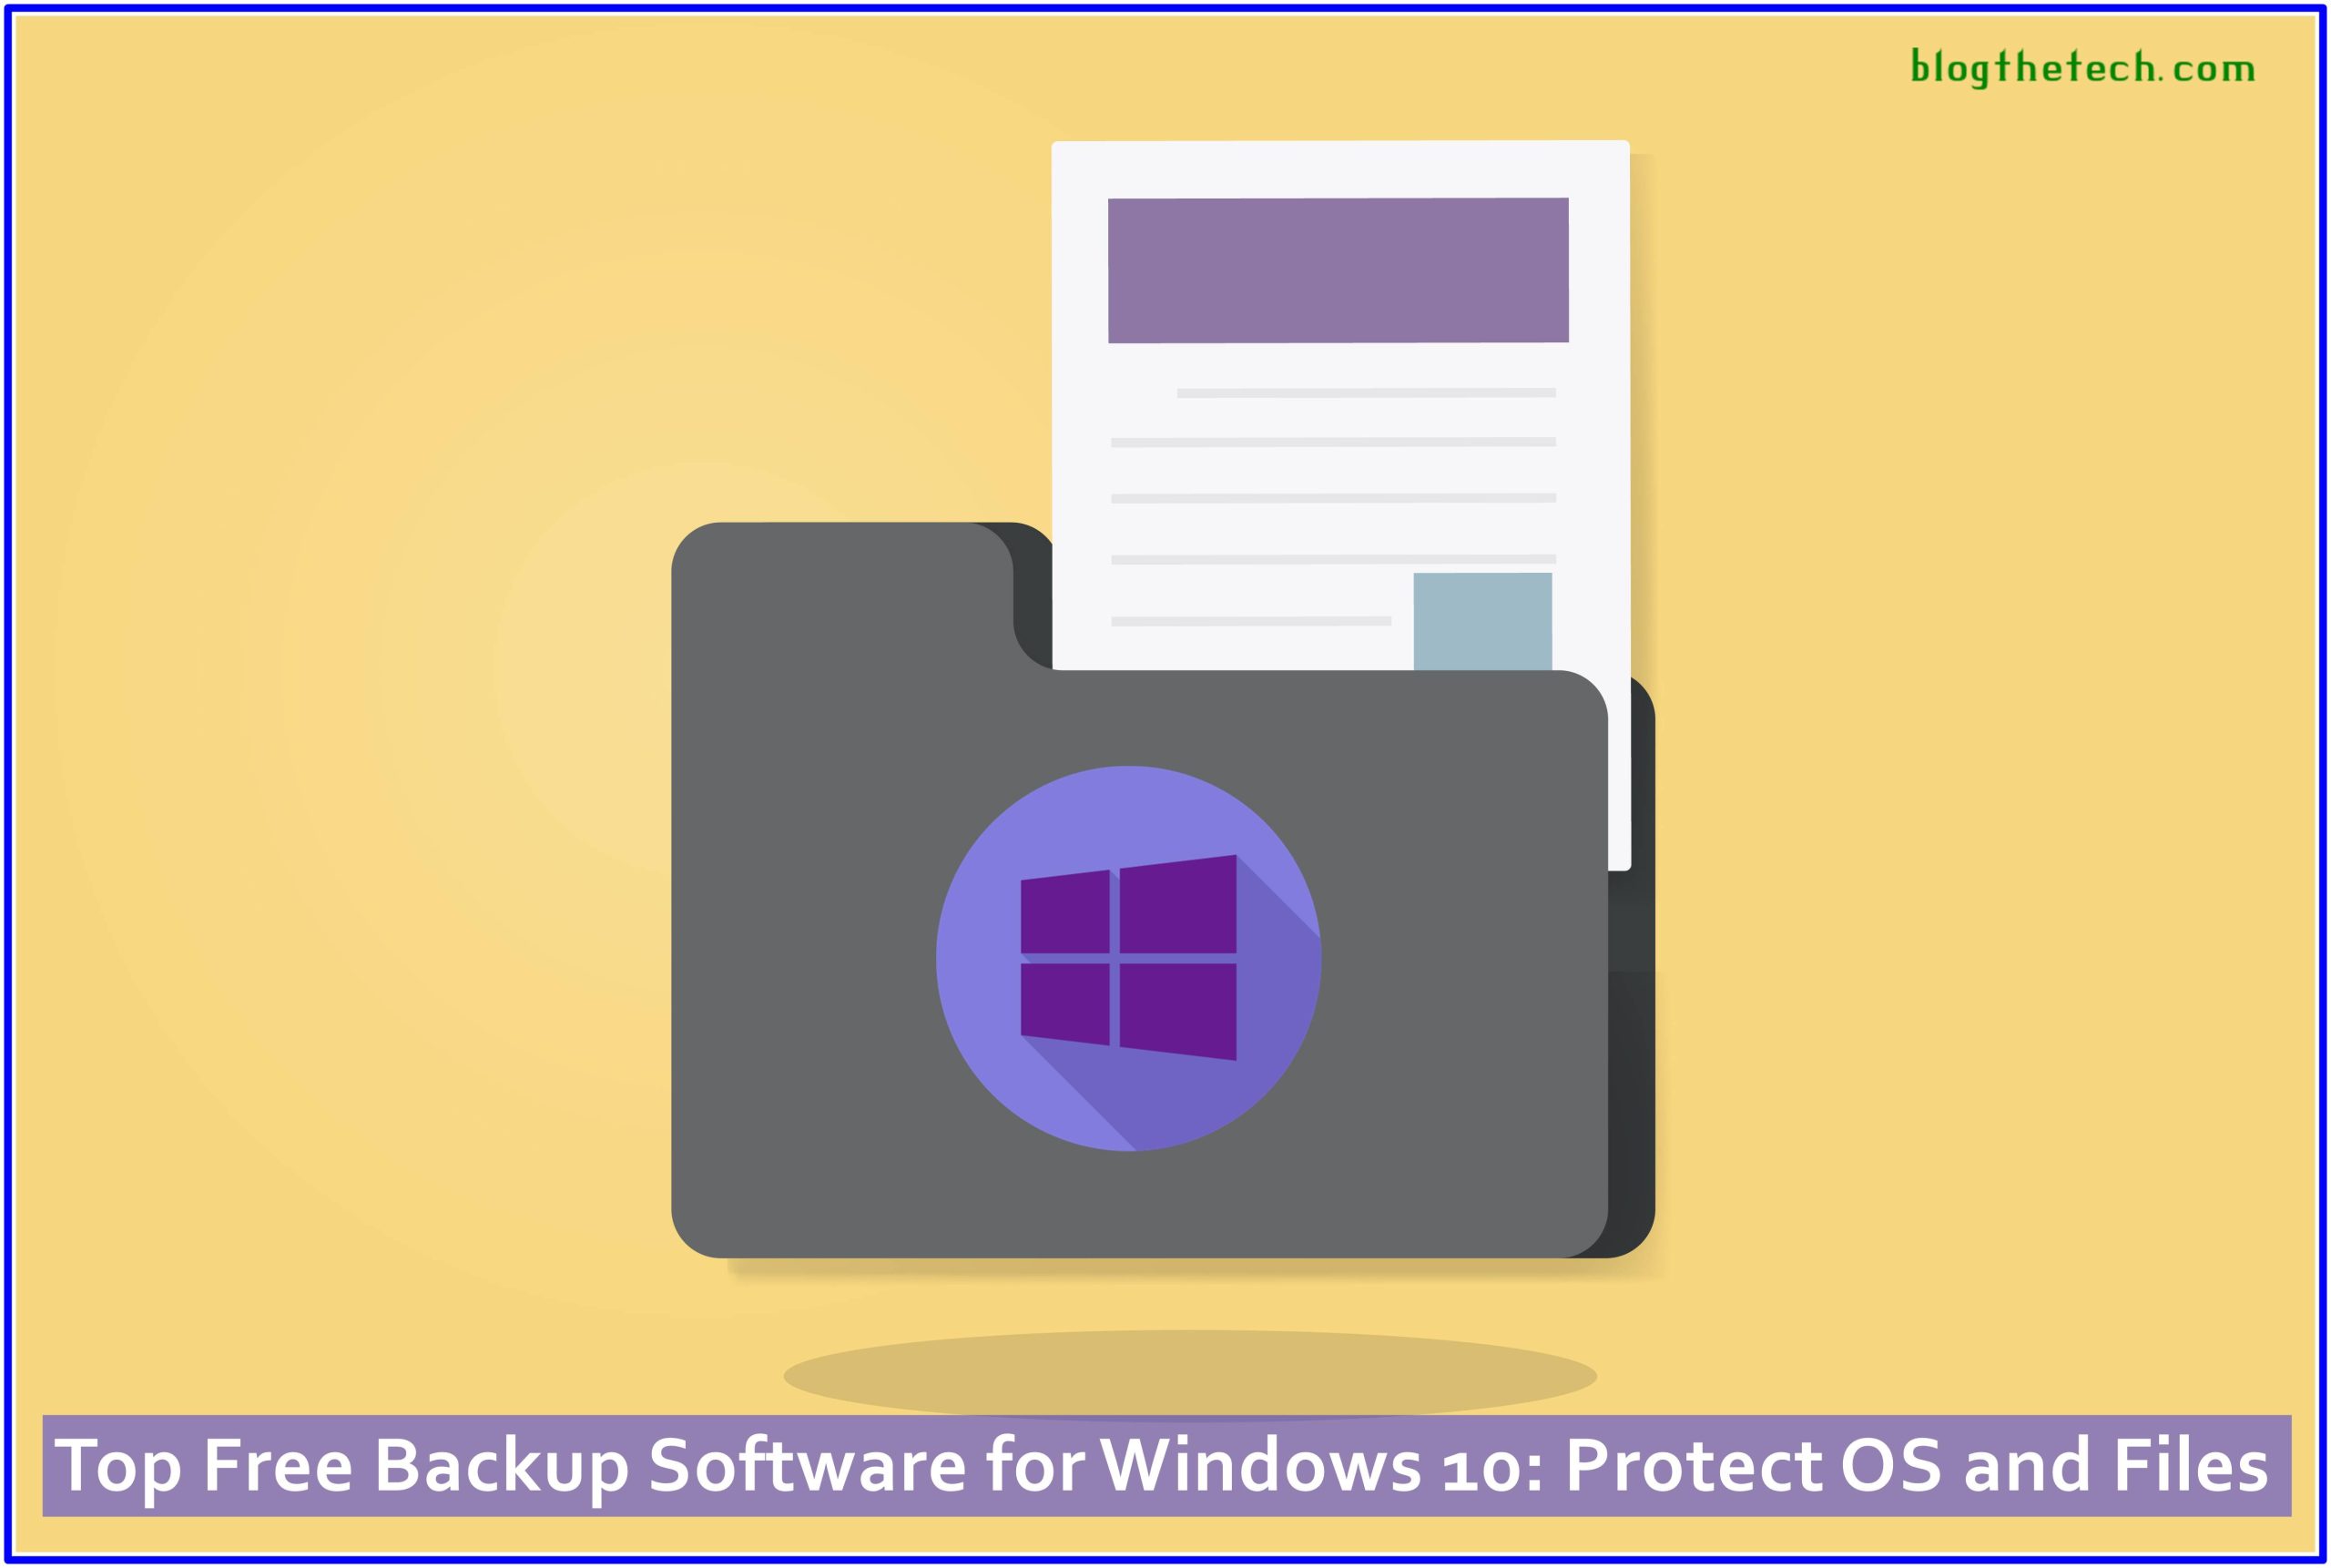 Top Free Backup Software for Windows 10: Protect OS and Files